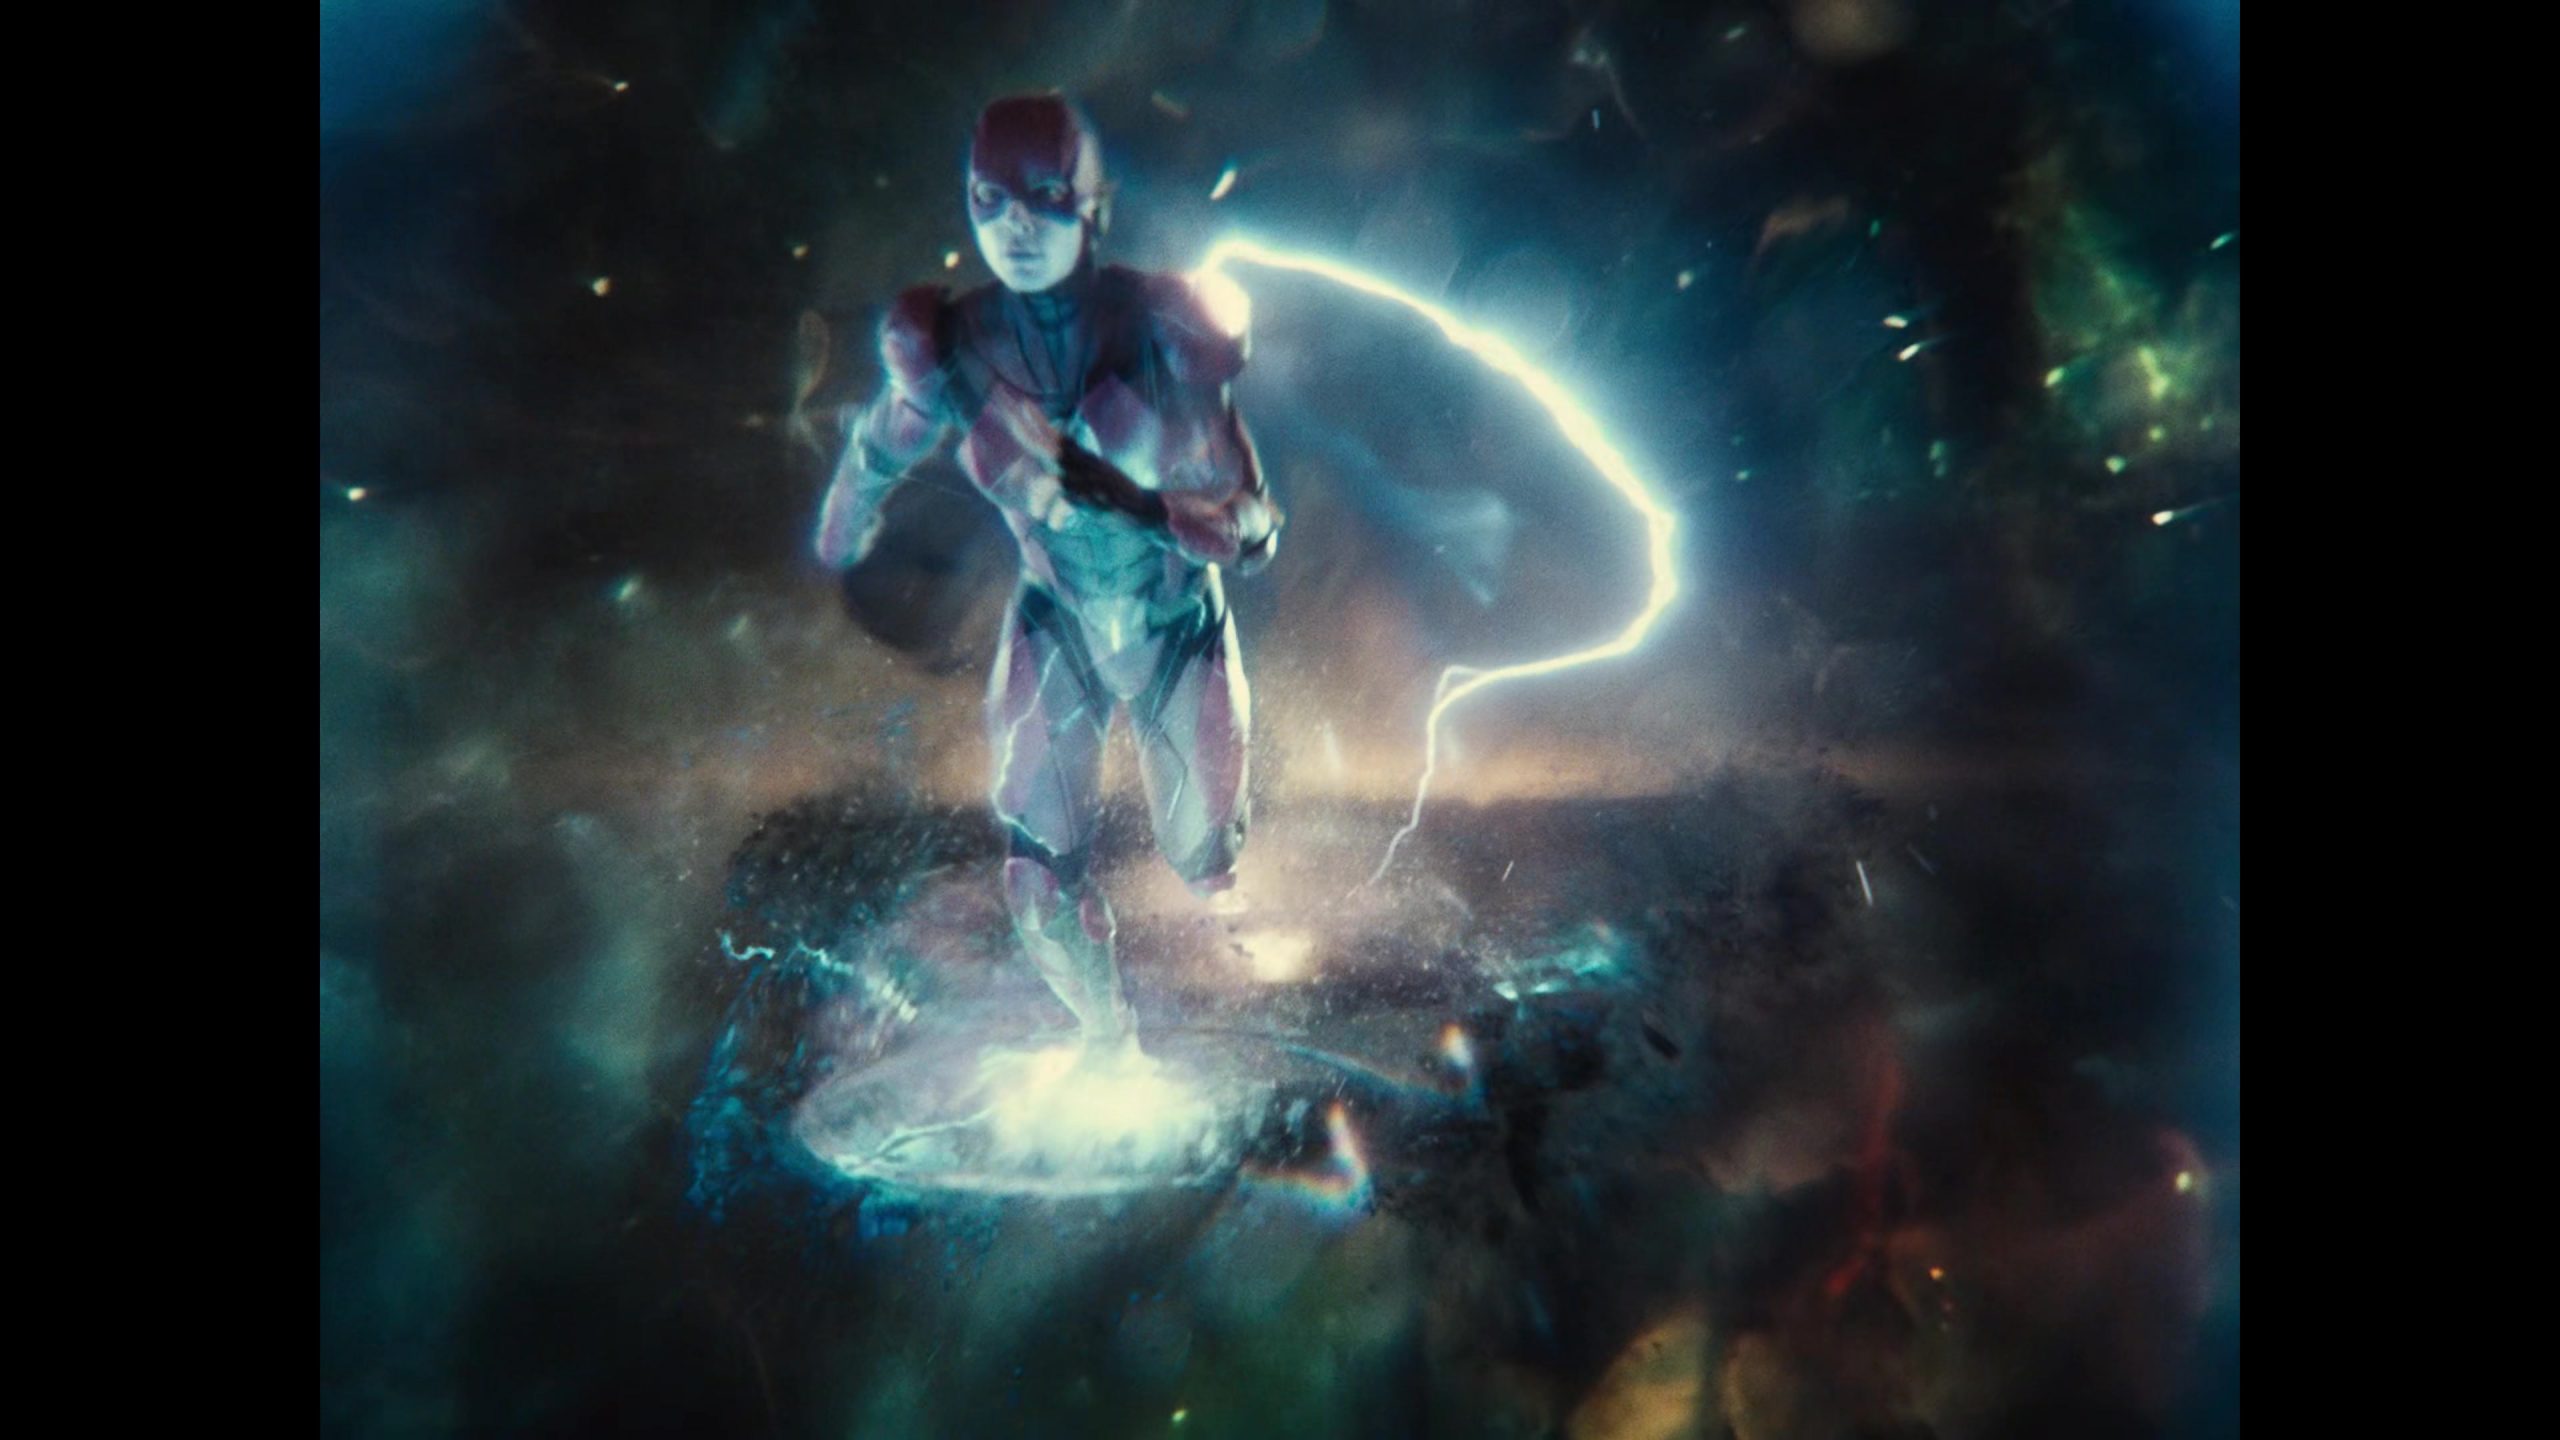 The Flash (Ezra Miller) attempts to rewind time in Zack Snyder's Justice League (2021), Warner Bros. Entertainment